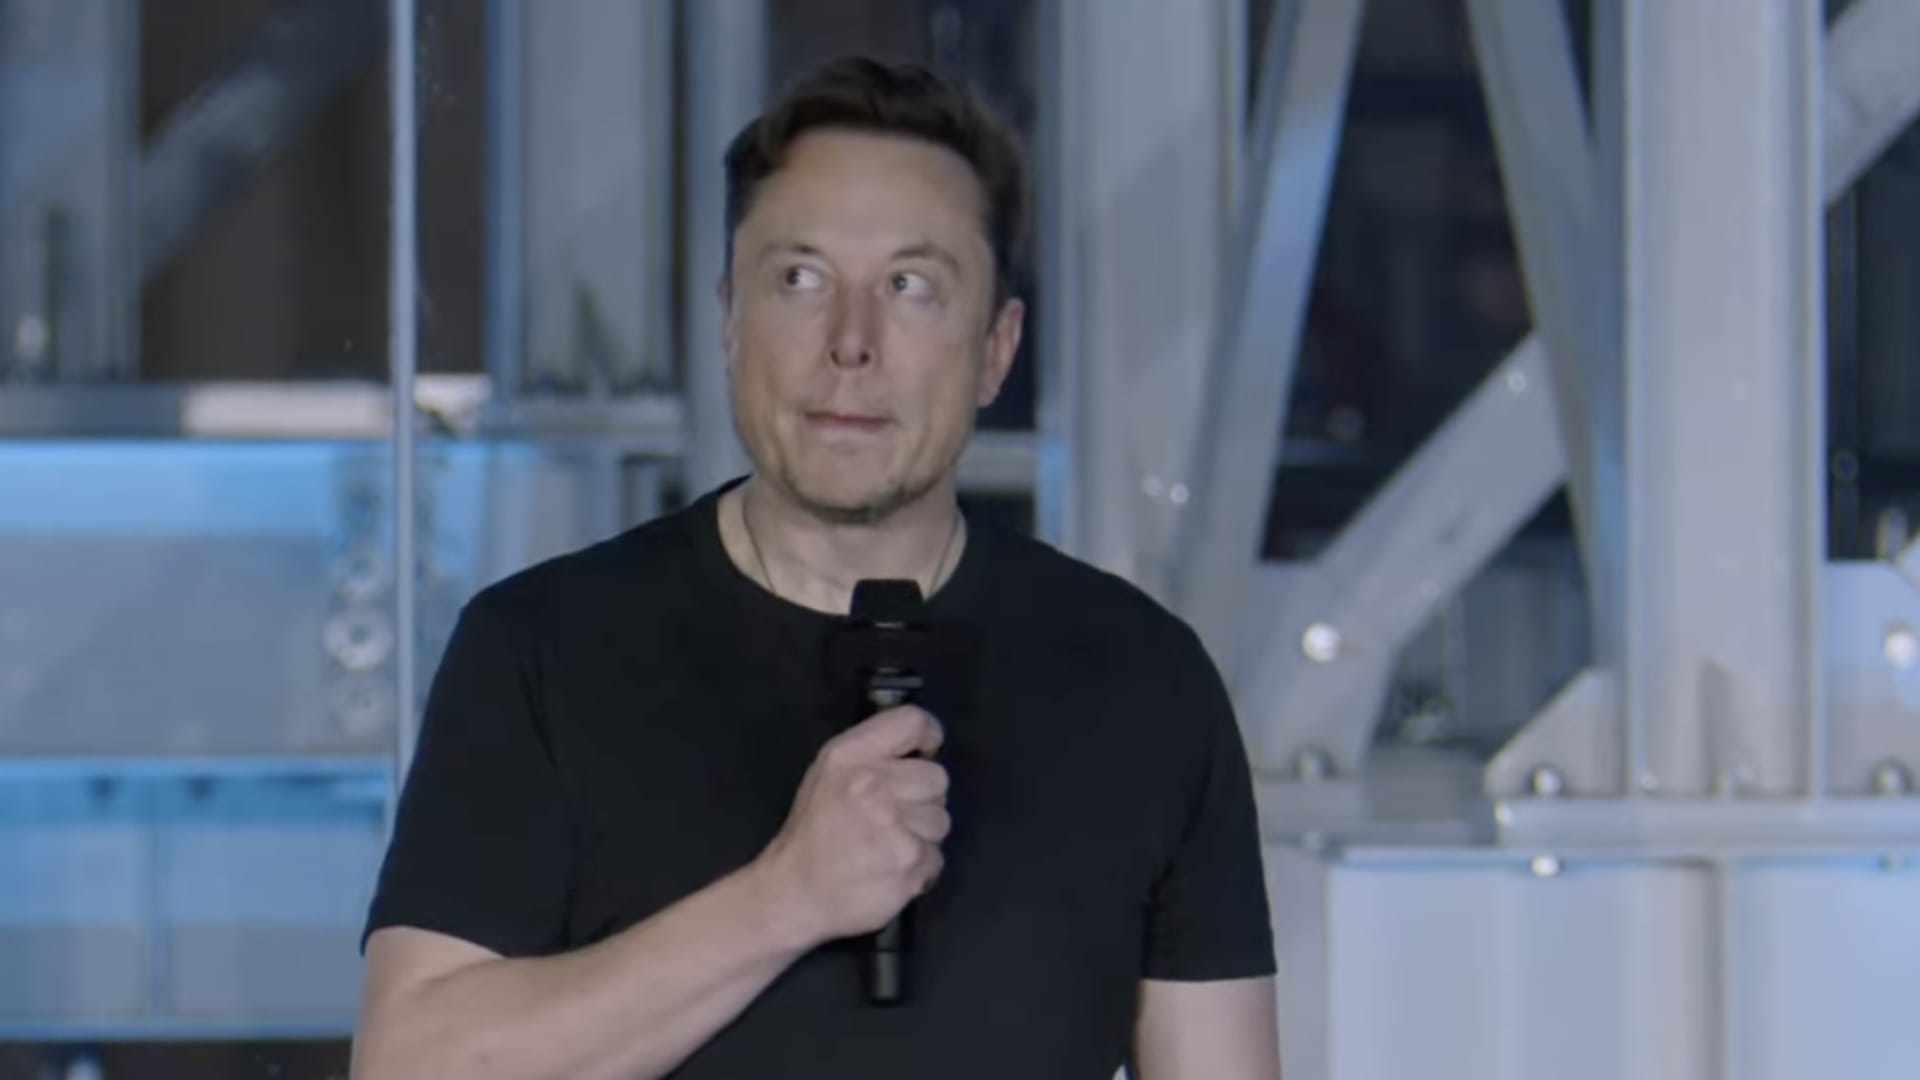 Elon Musk apologizes after calling disabled Twitter employee who was laid off 'the worst'